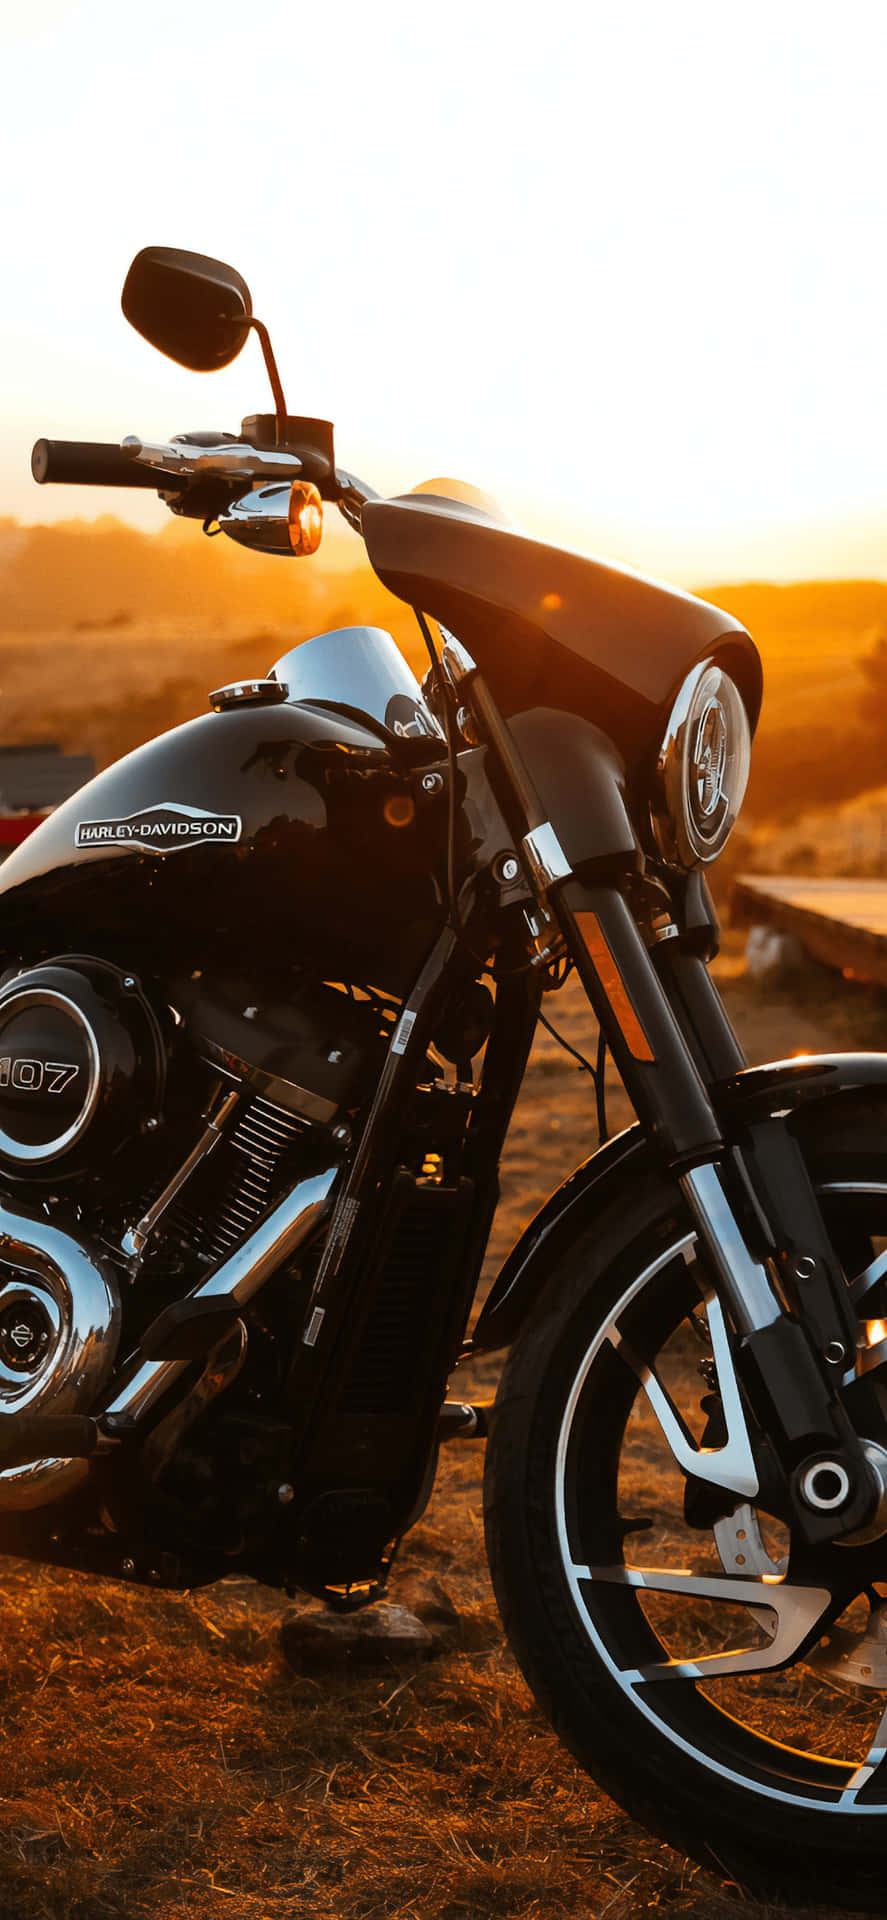 Experience pure high-octane power with the iconic Harley Davidson HD. Wallpaper